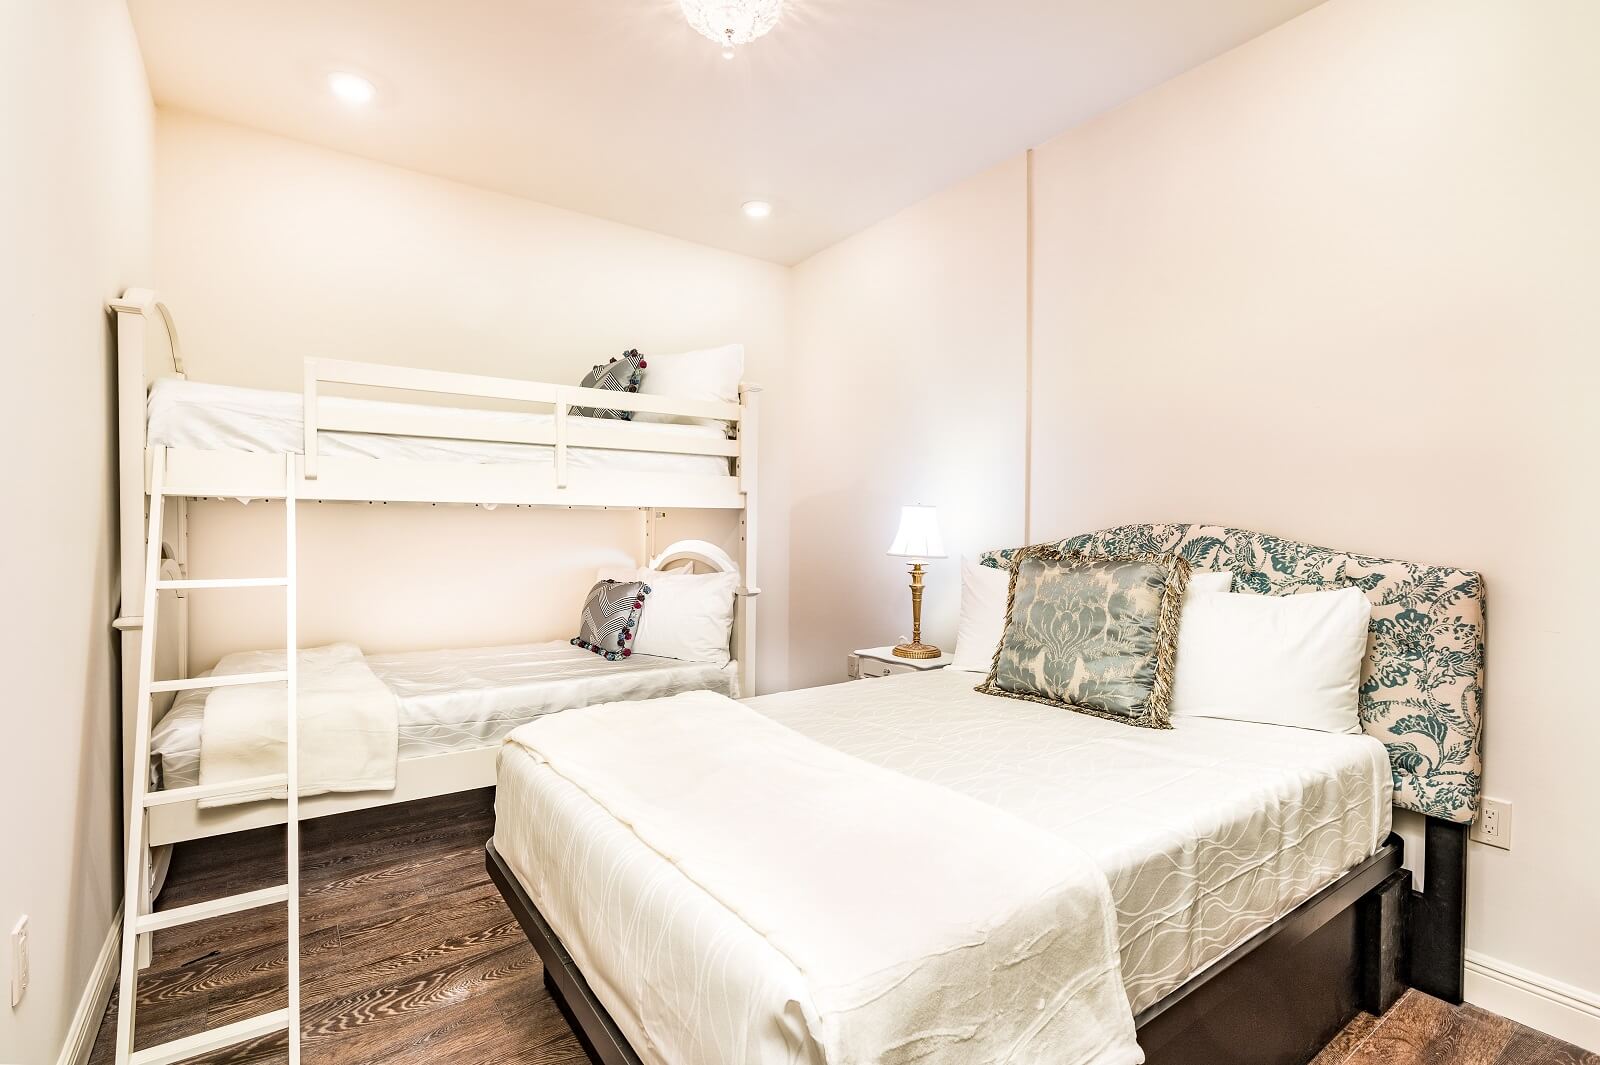 The Alexandre Unit 401 bedroom, a New Orleans luxury rental.